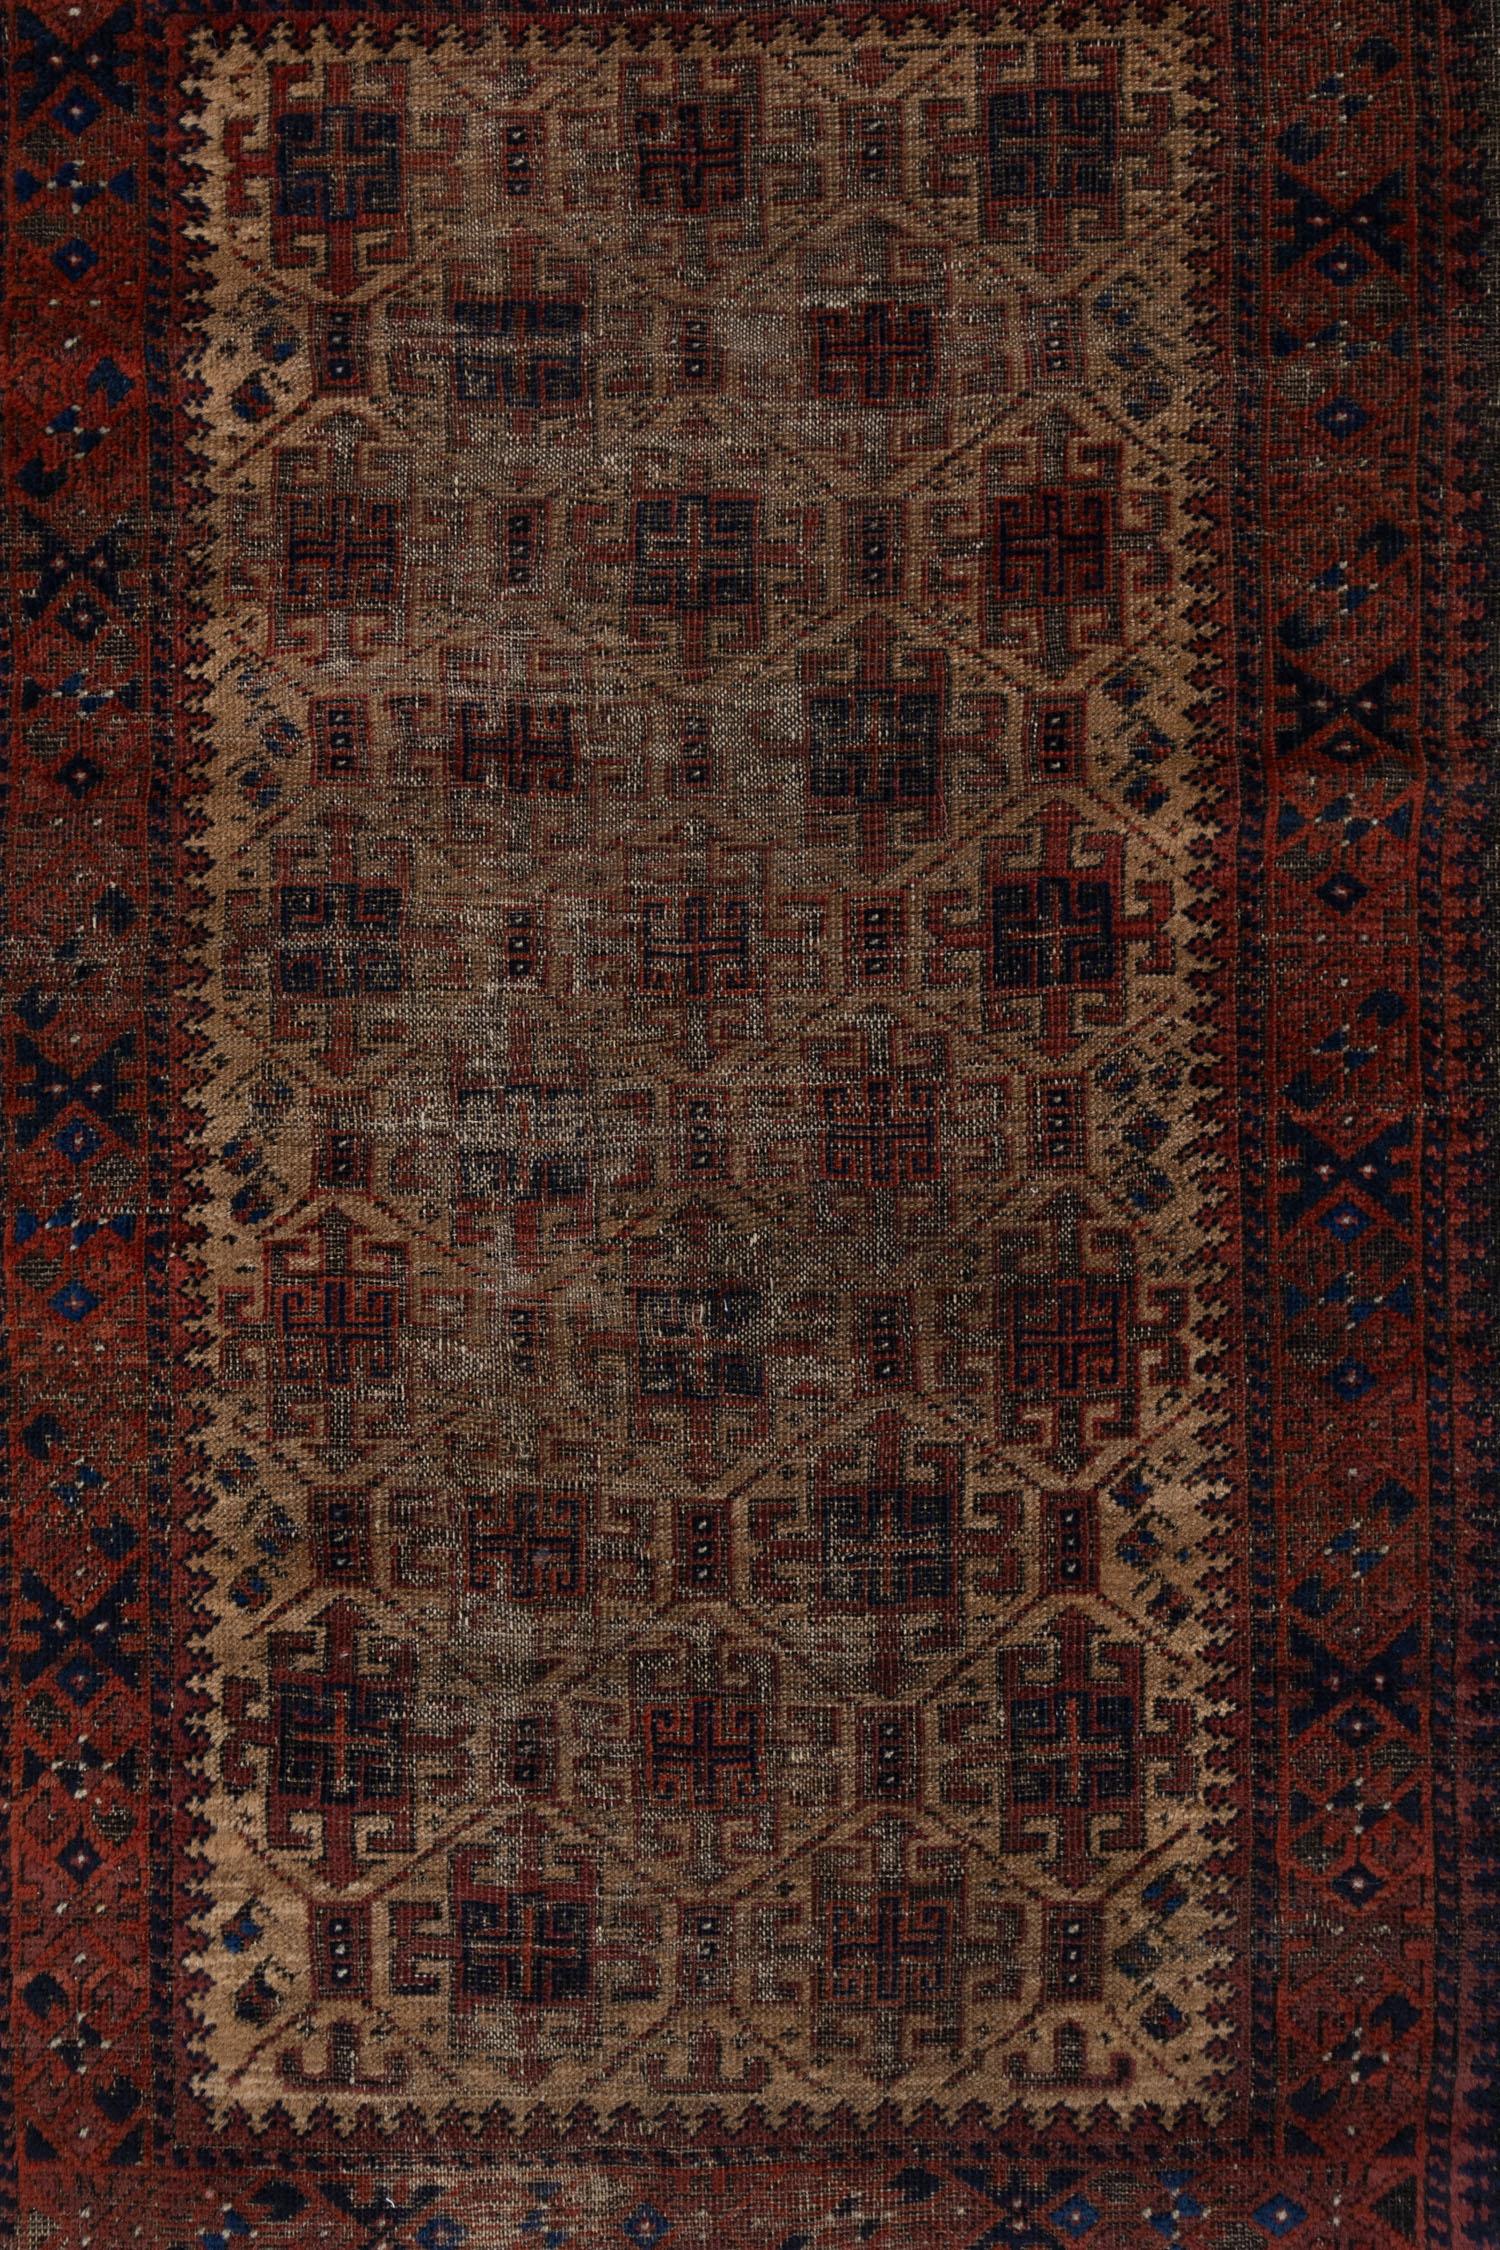 Beautiful 1880’s Persian Baluch rug with a lovely earthy colorway of terra-cotta, rust, copper and brown. This old piece has a fantastic patina and plenty of character. 